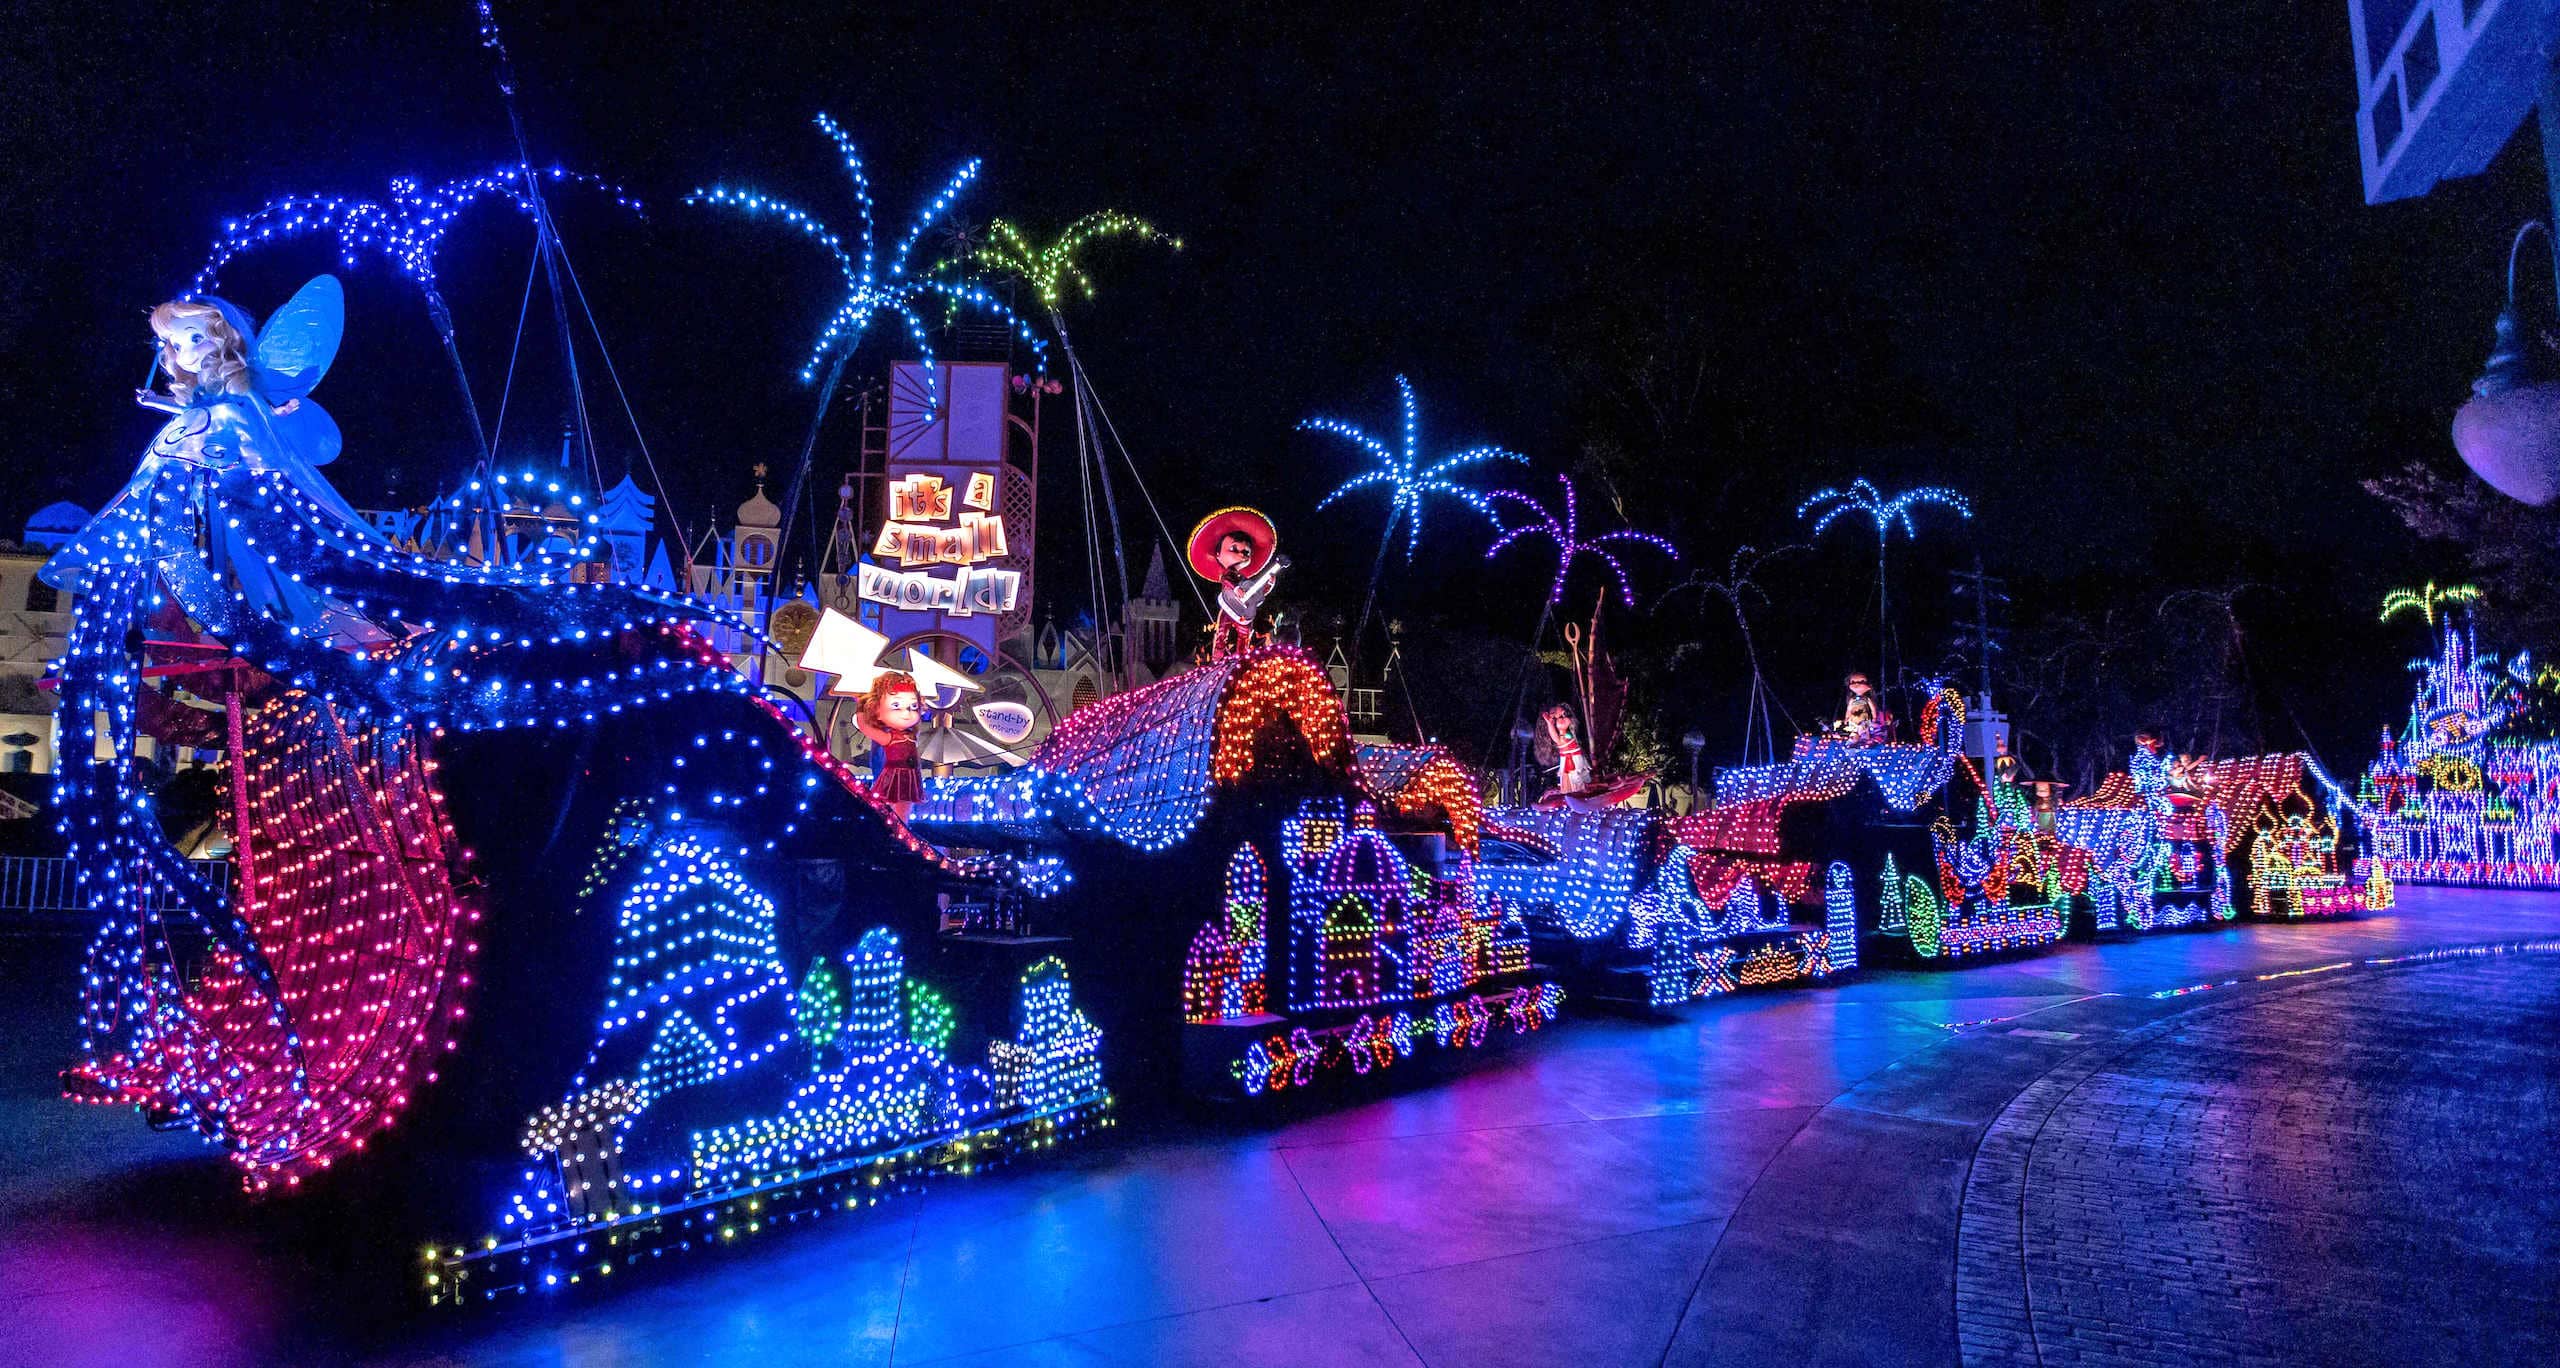 Main Street Electrical Parade finale float